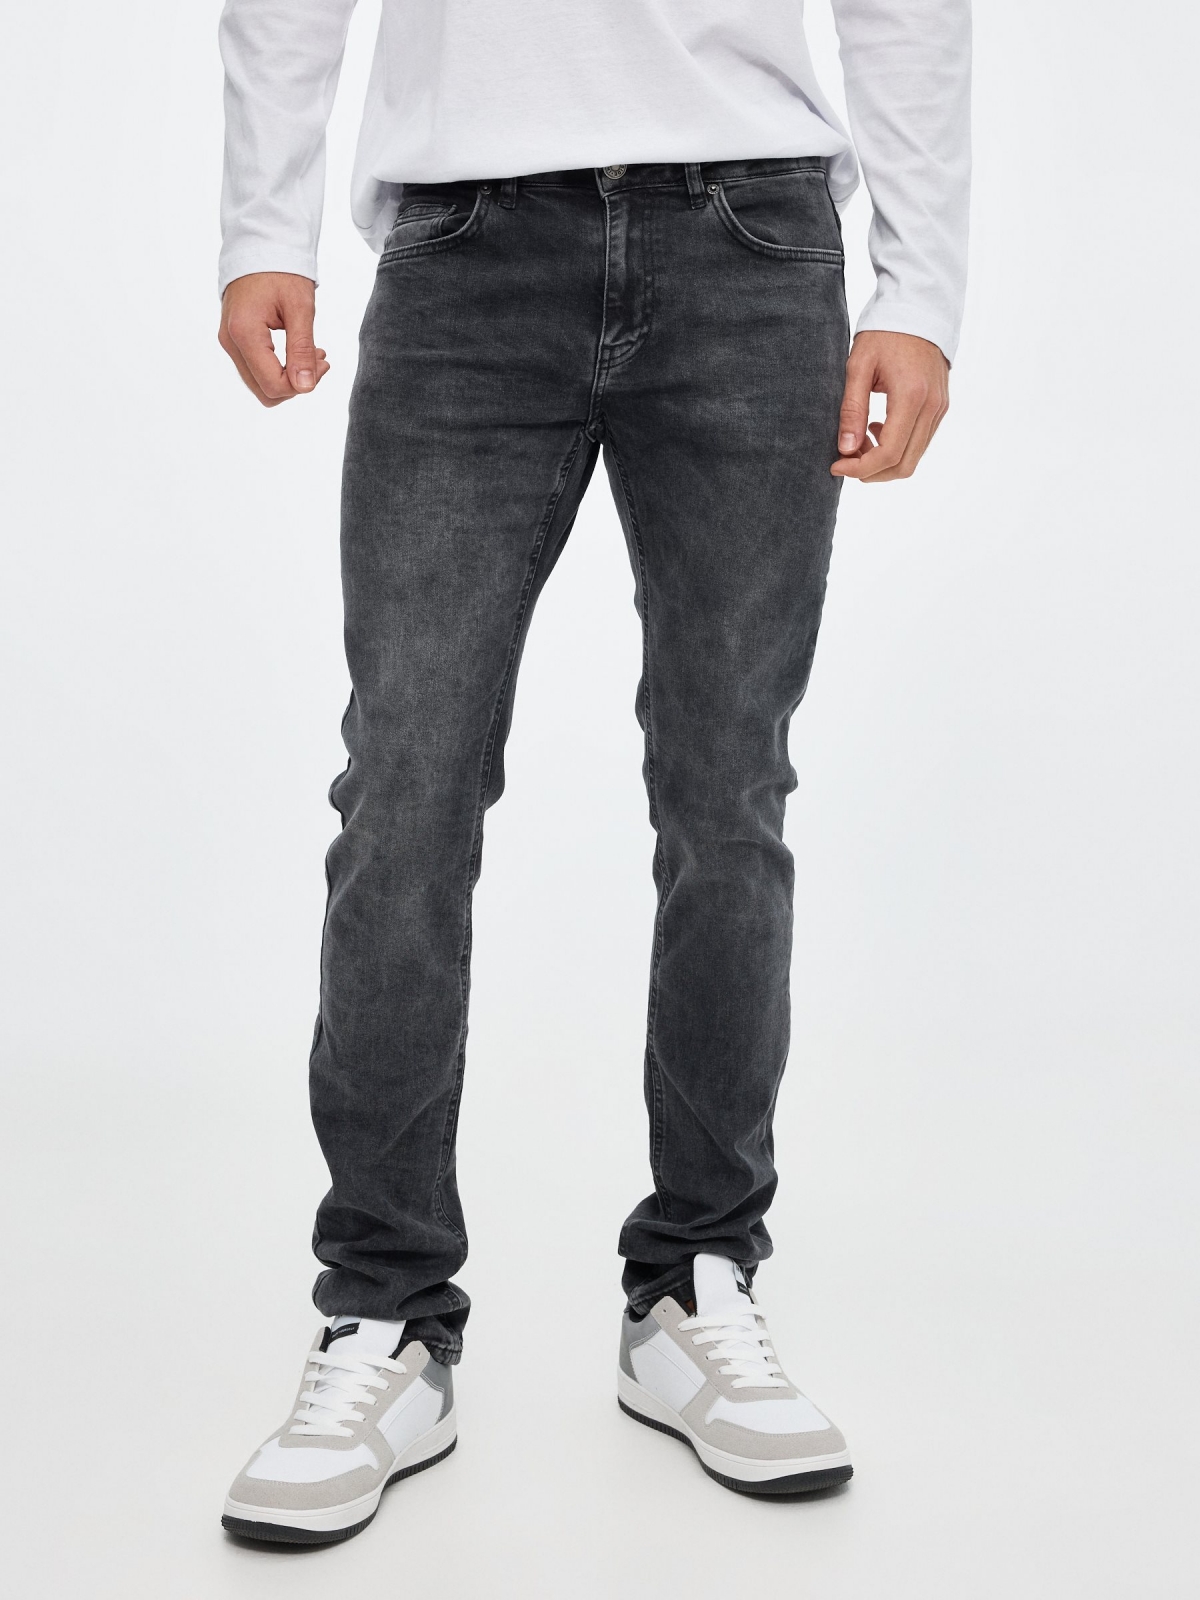 Slim jeans black middle front view